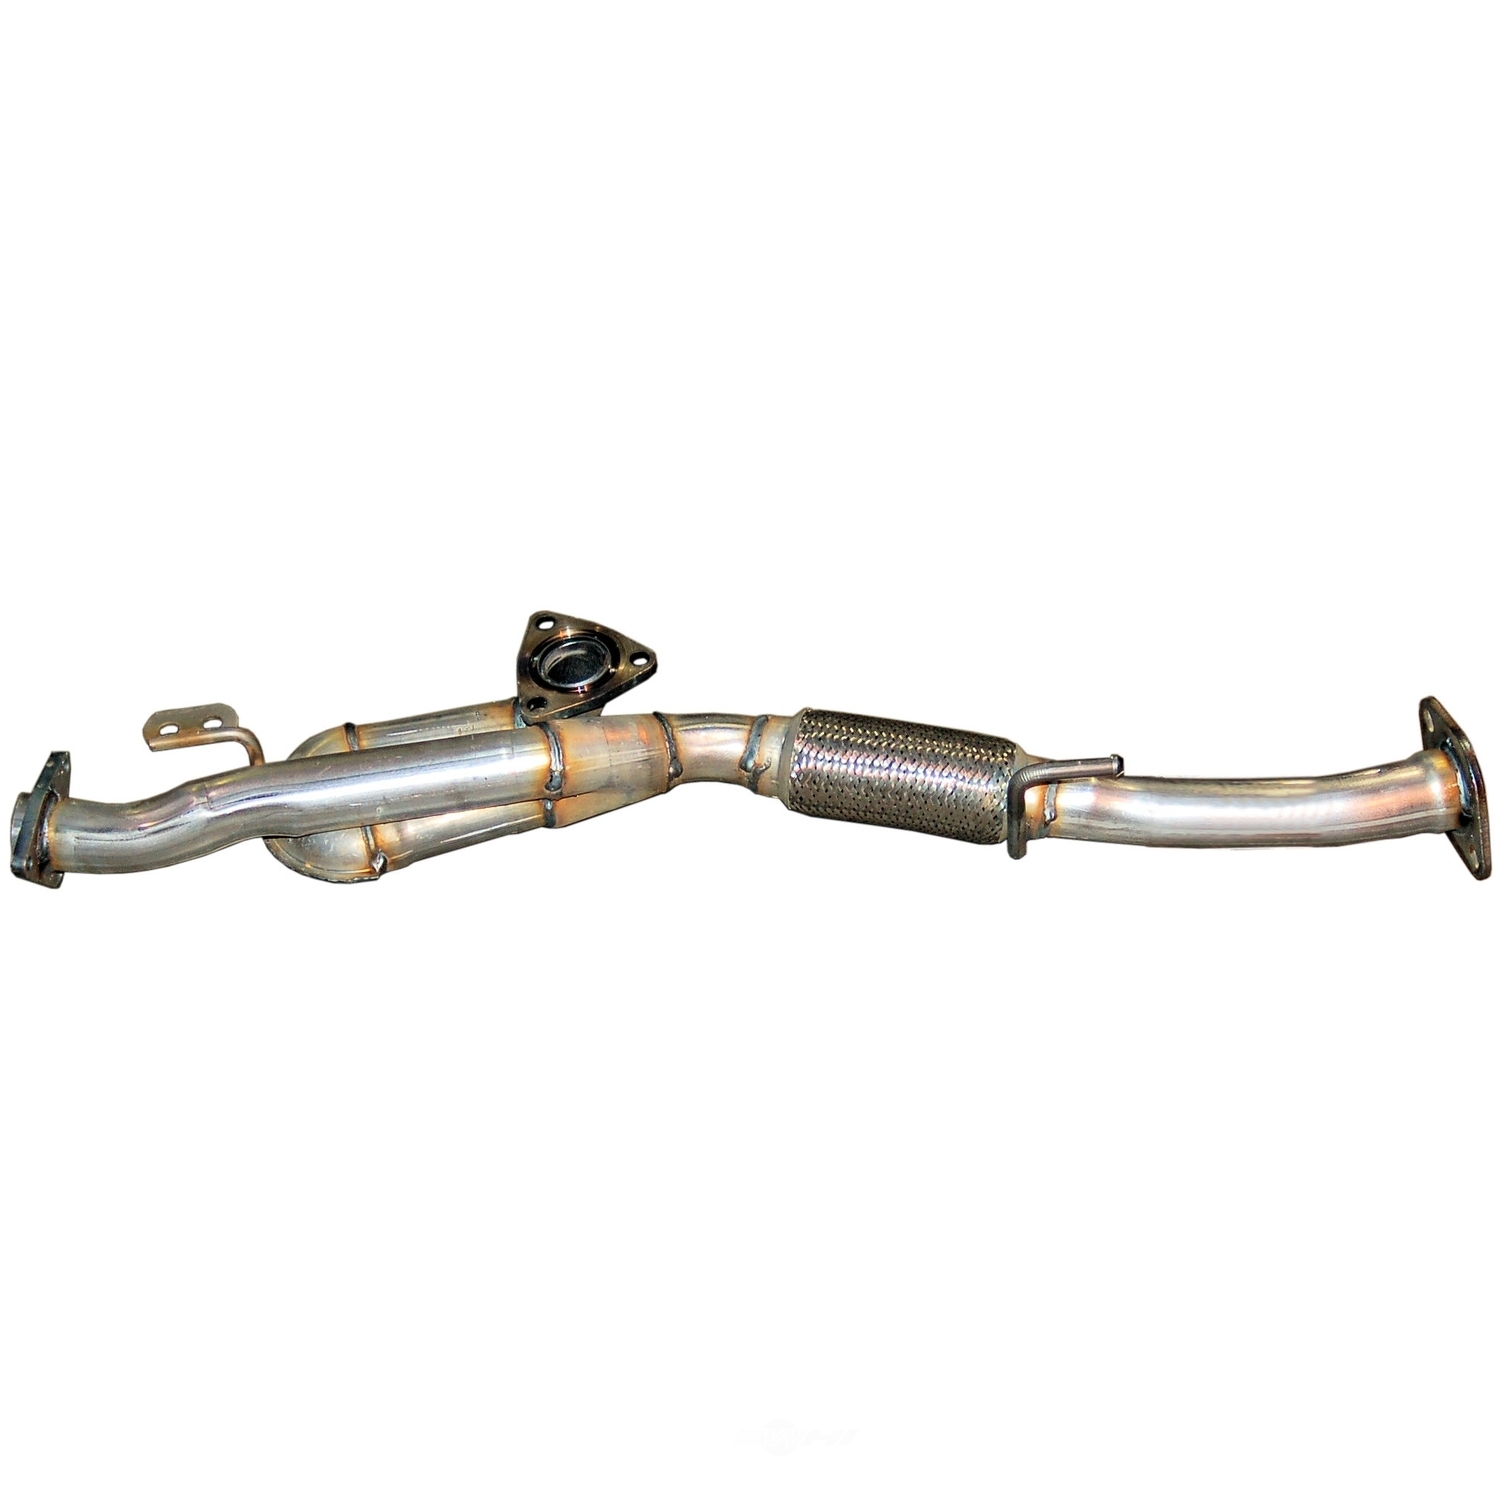 Exhaust Pipe-Replacement Front Bosal 850-071